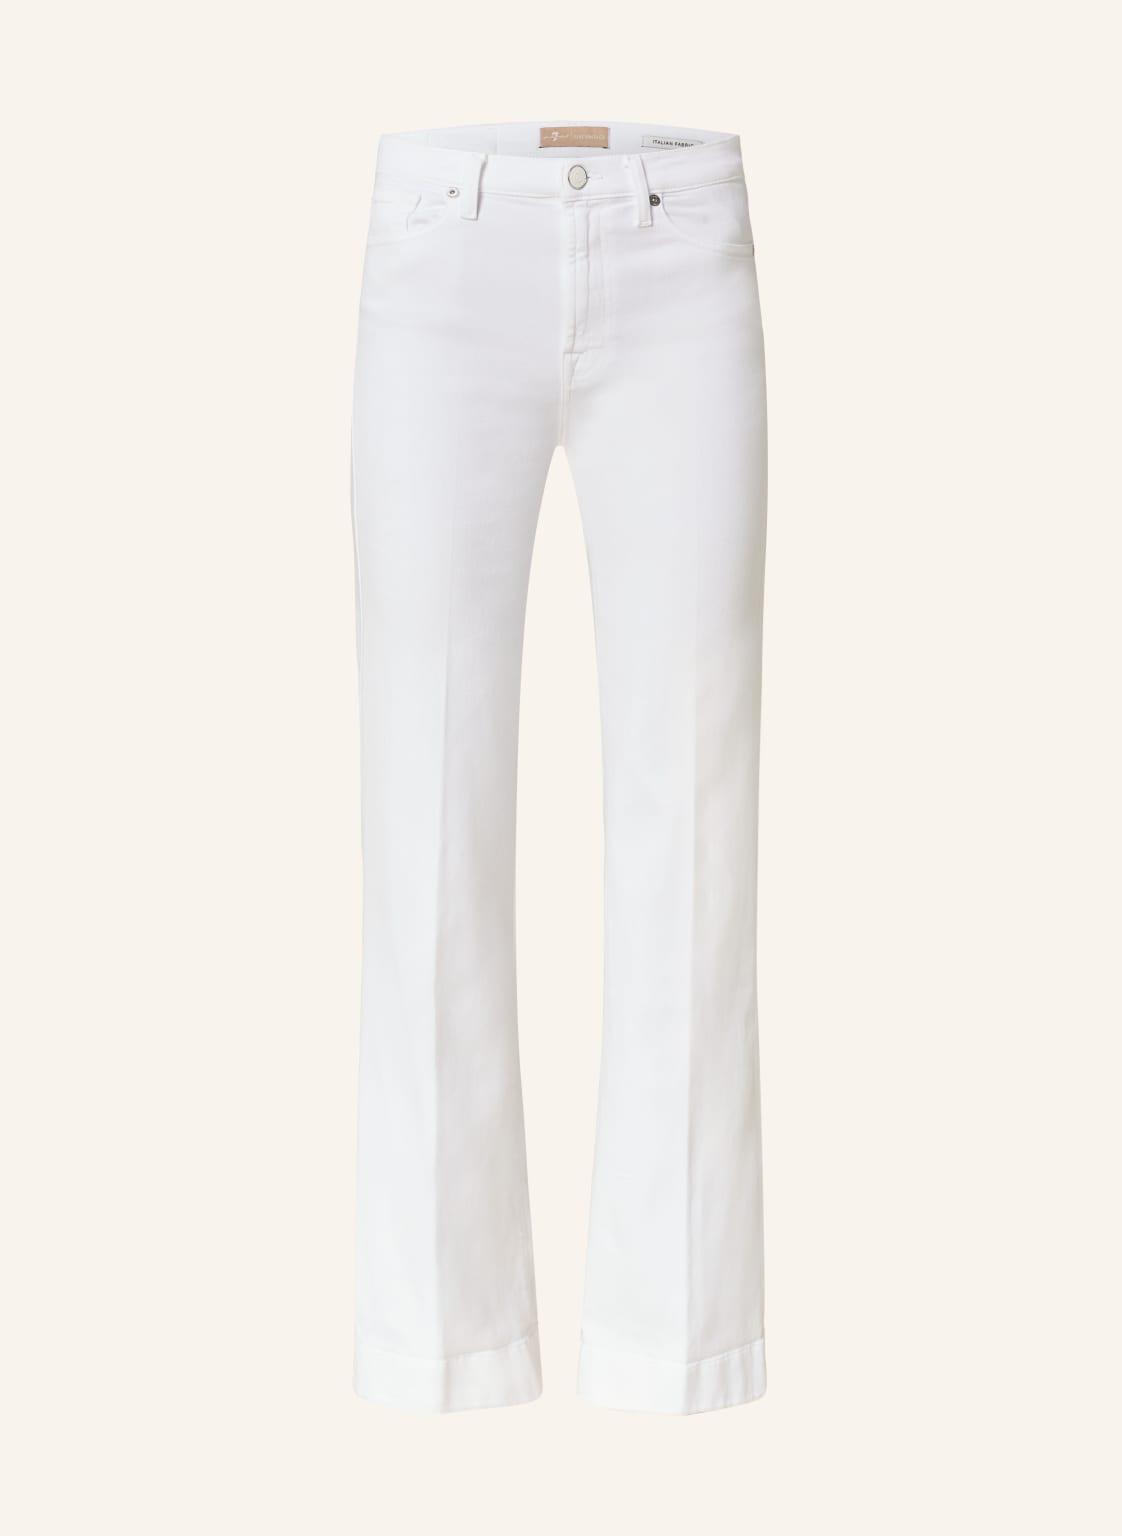 7 For All Mankind Flared Jeans Modern Dojo weiss von 7 For All Mankind